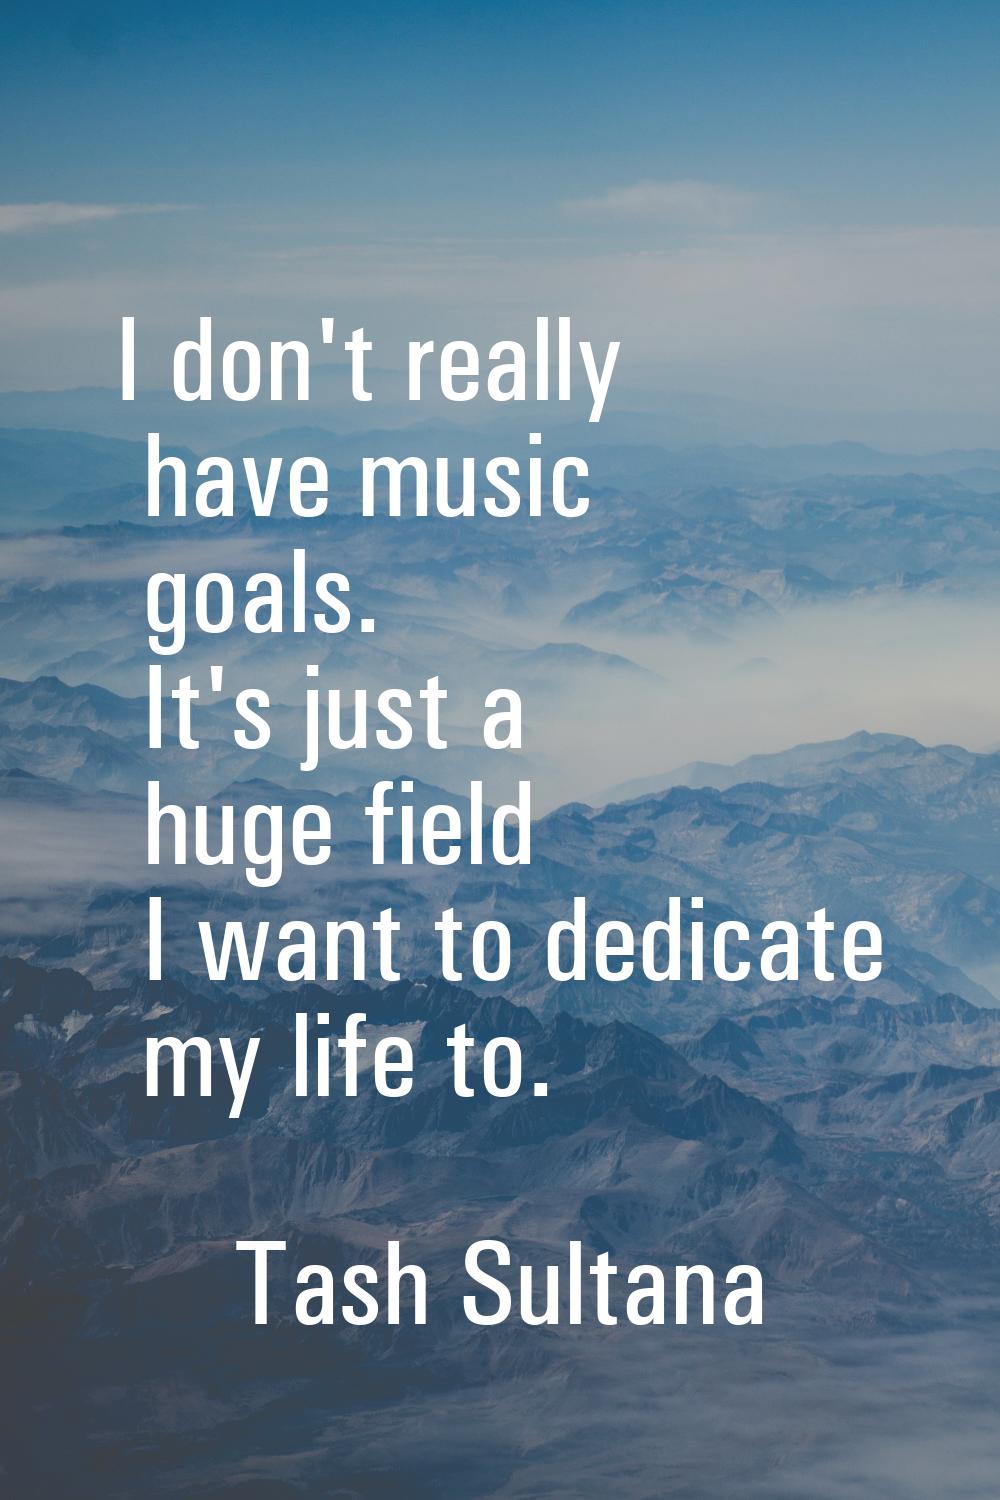 I don't really have music goals. It's just a huge field I want to dedicate my life to.